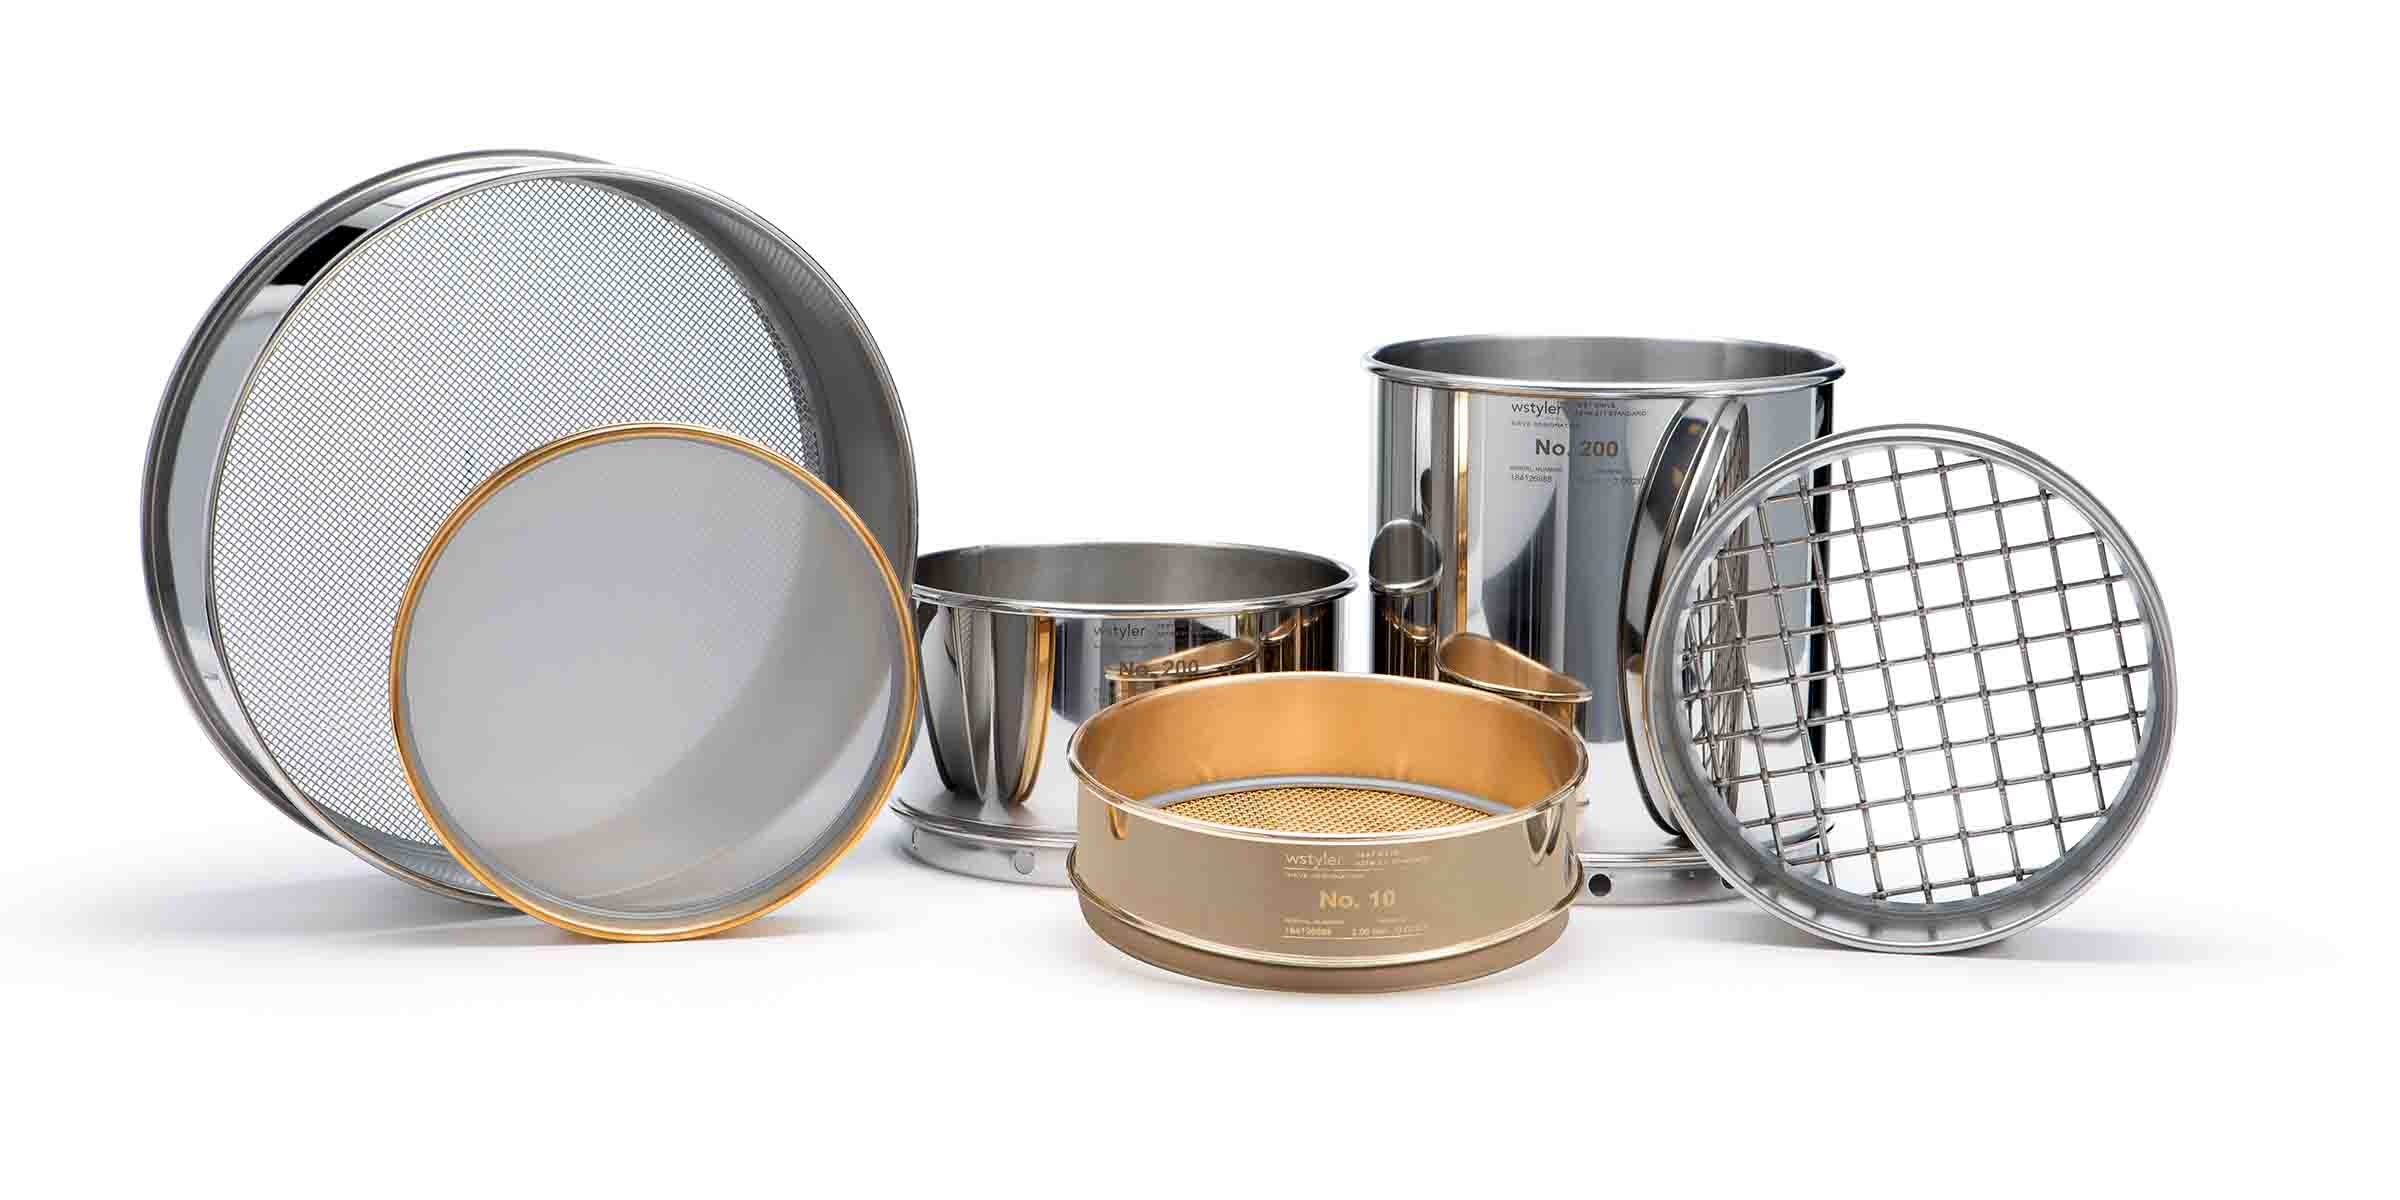 Matched vs. Master vs. Gold Test Sieves: What Works for Me?